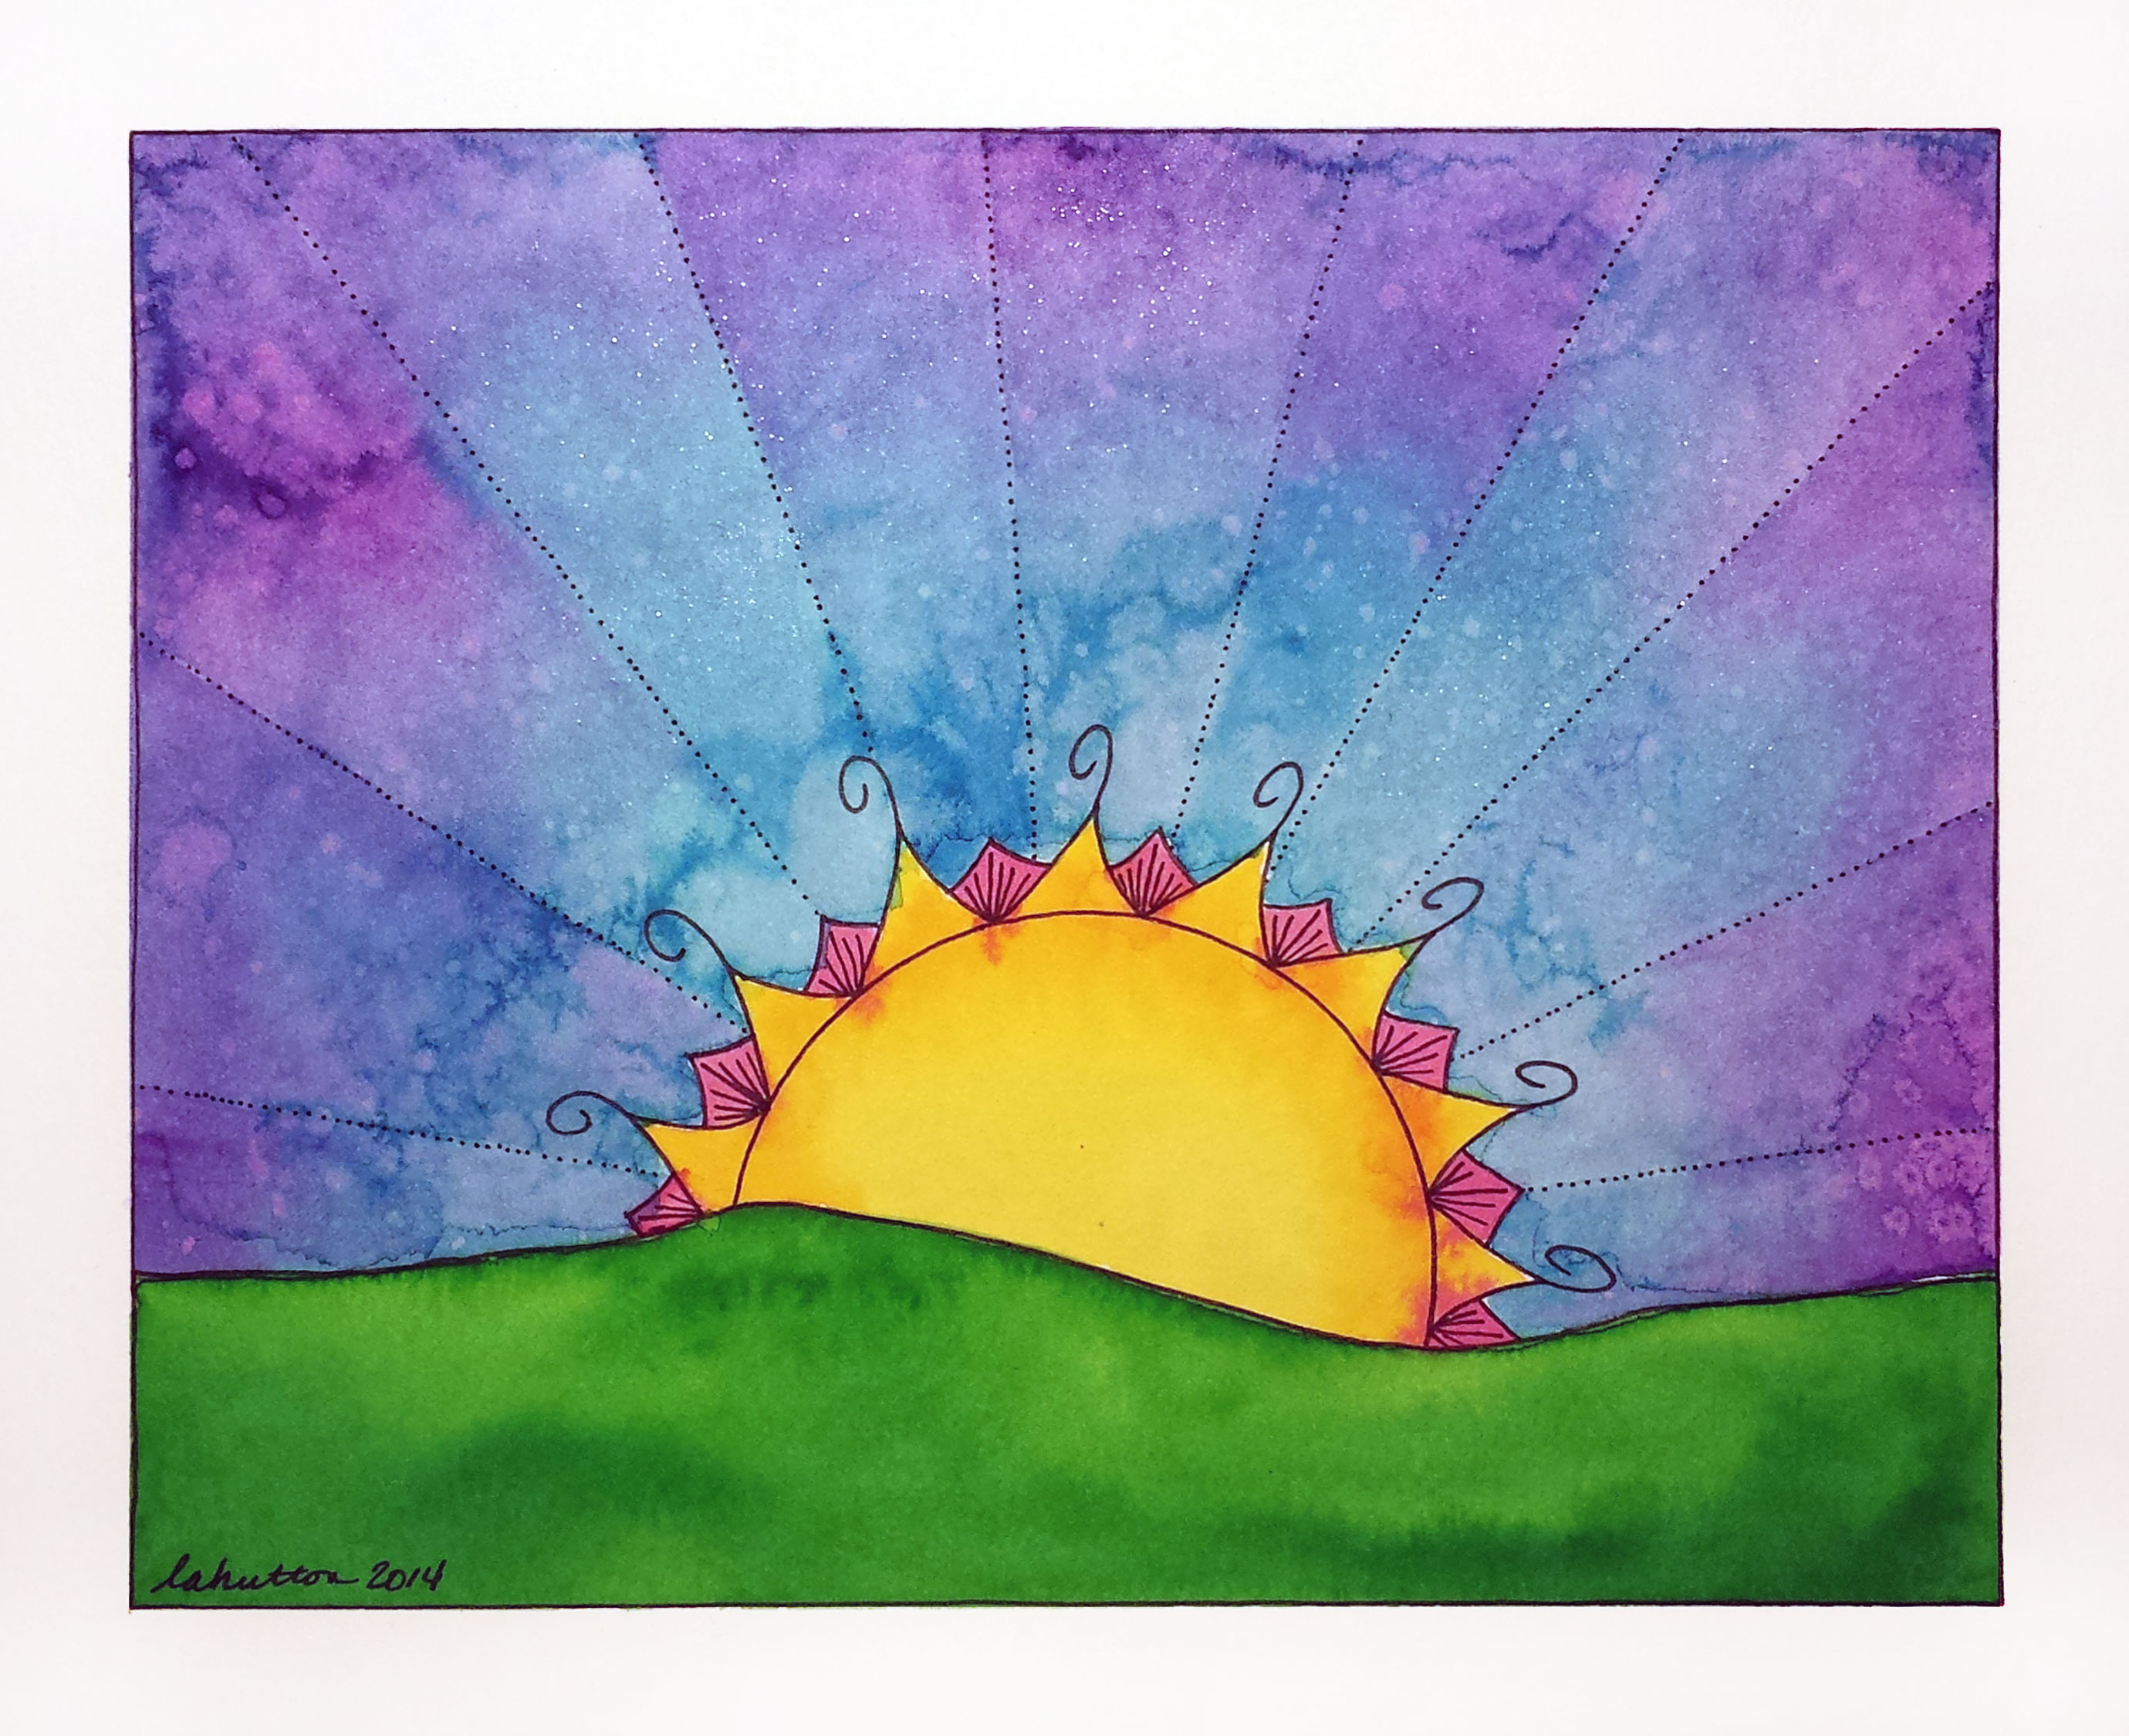 Sunset | Watercolor and pen on paper | 7.5" x 9" | June 2014